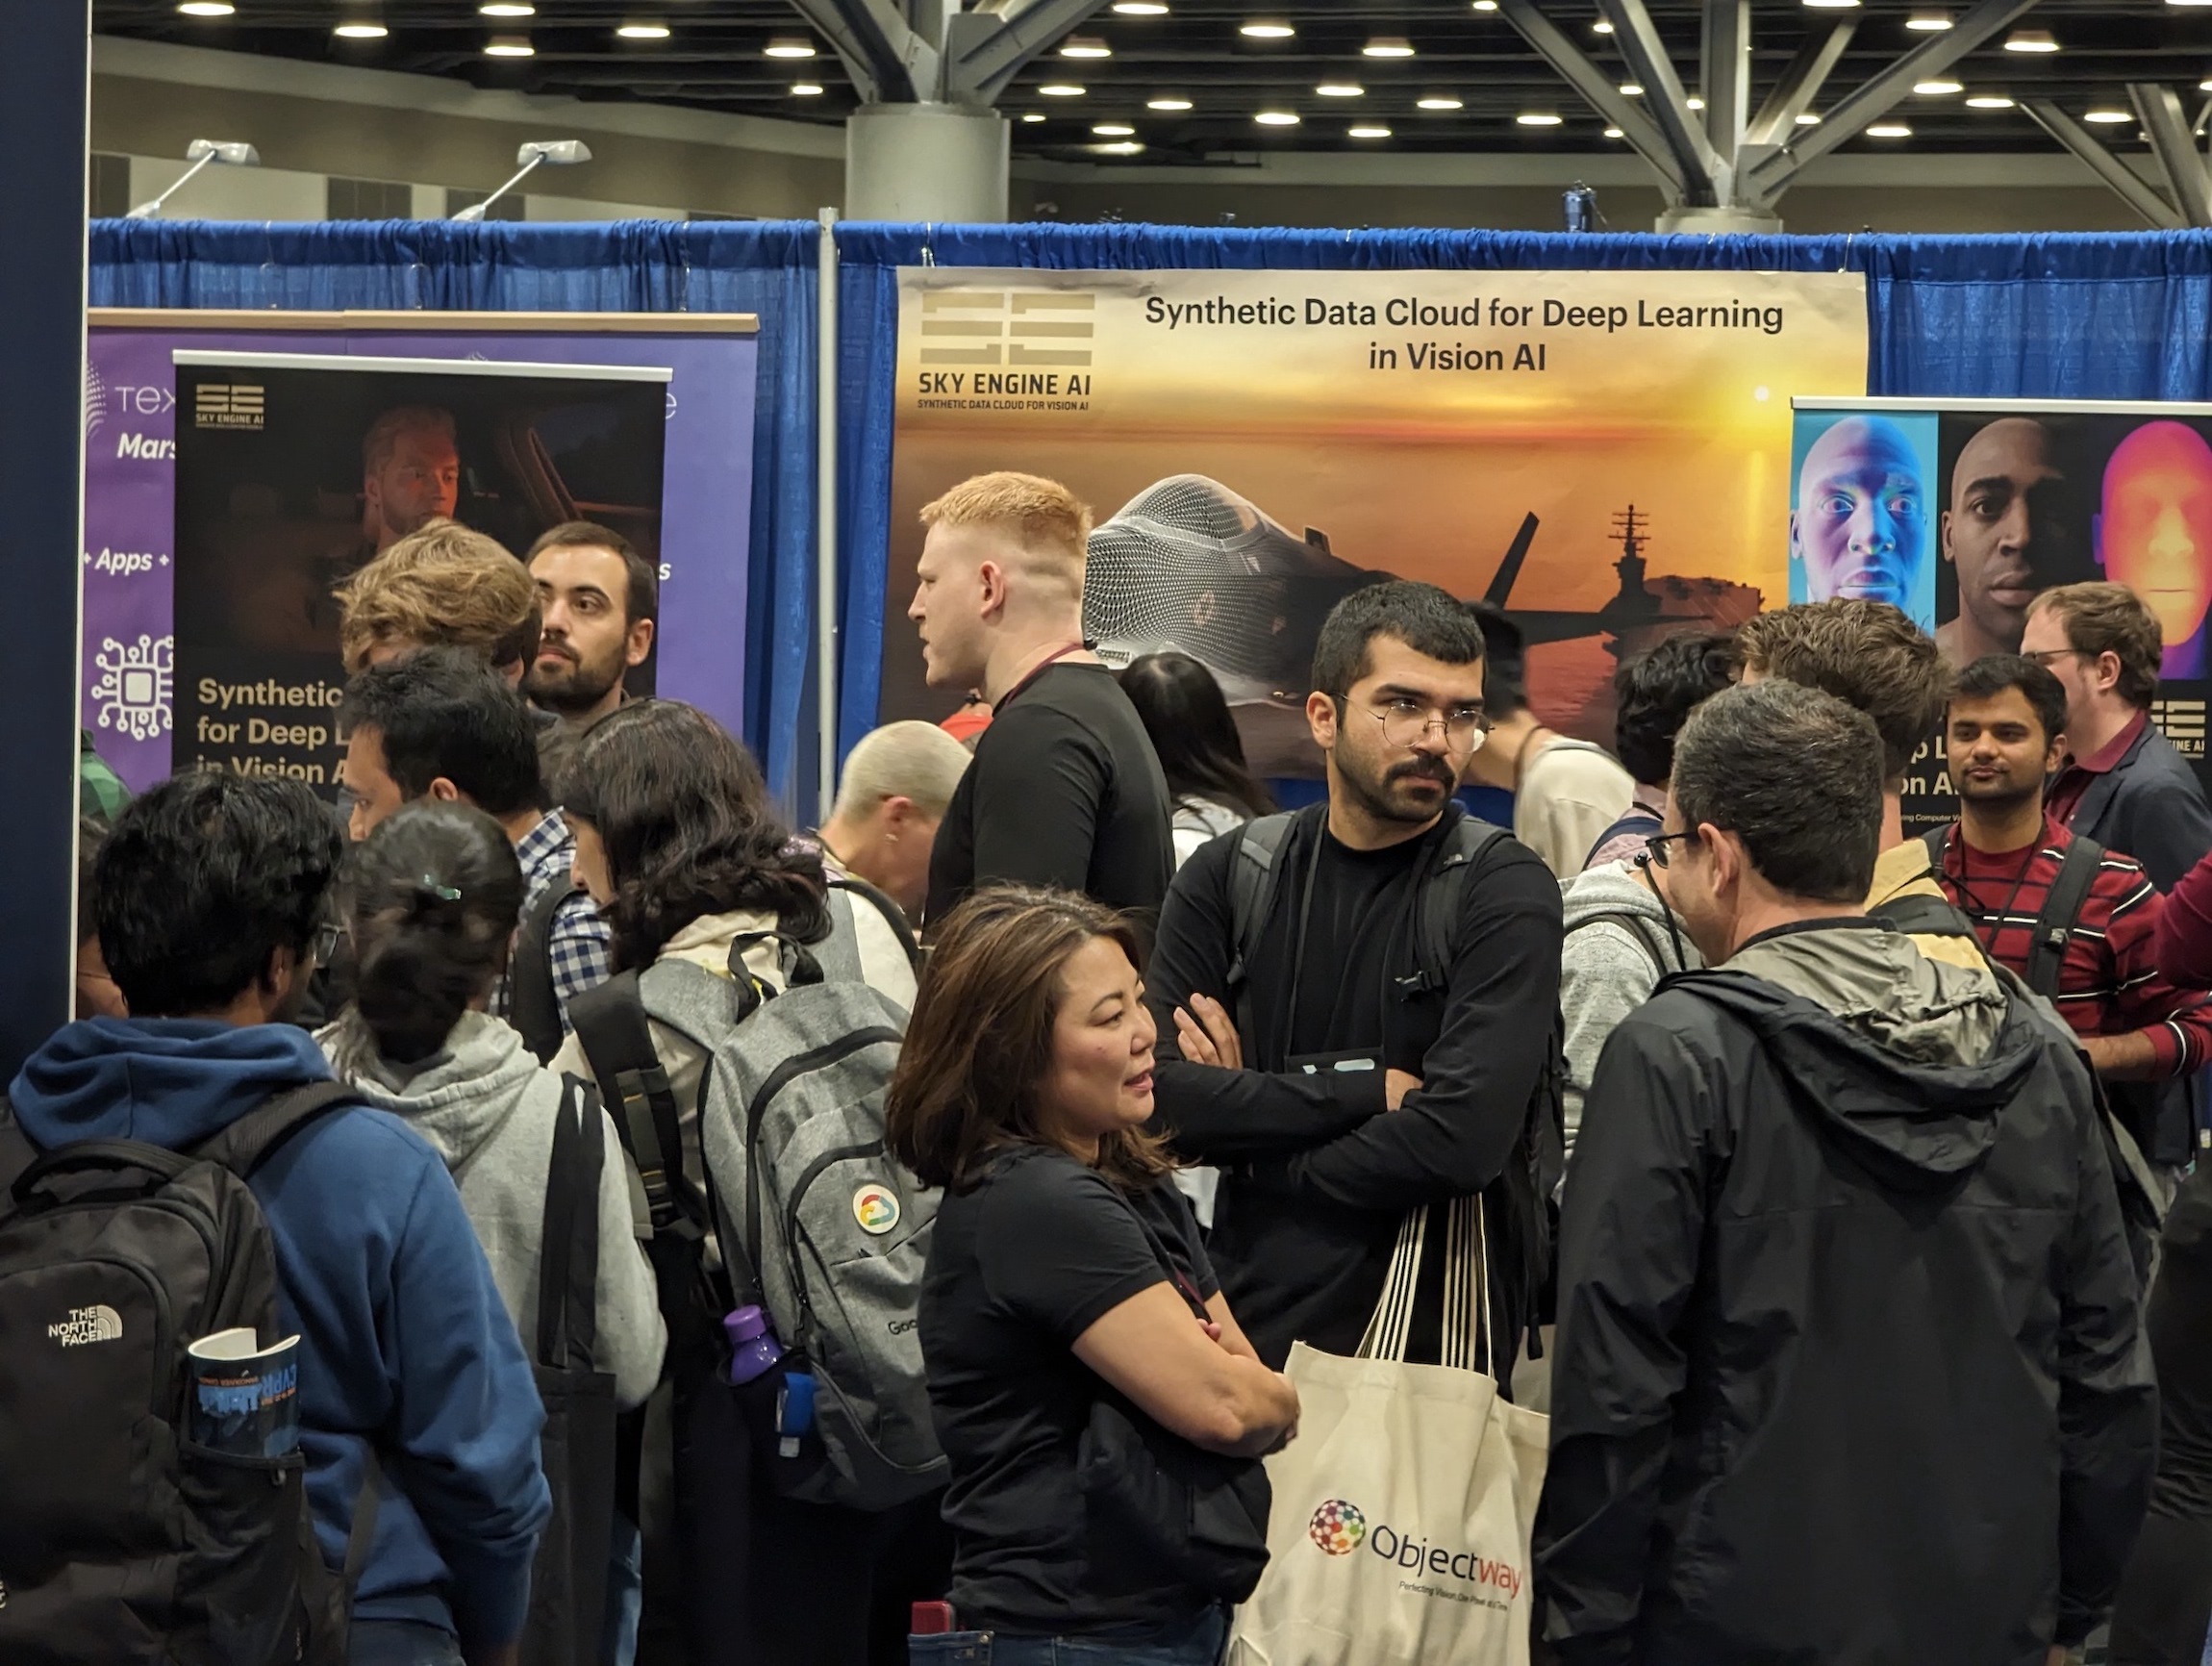 SKY ENGINE AI crowded booth at CVPR conference 2023 in Vancouver, Canada